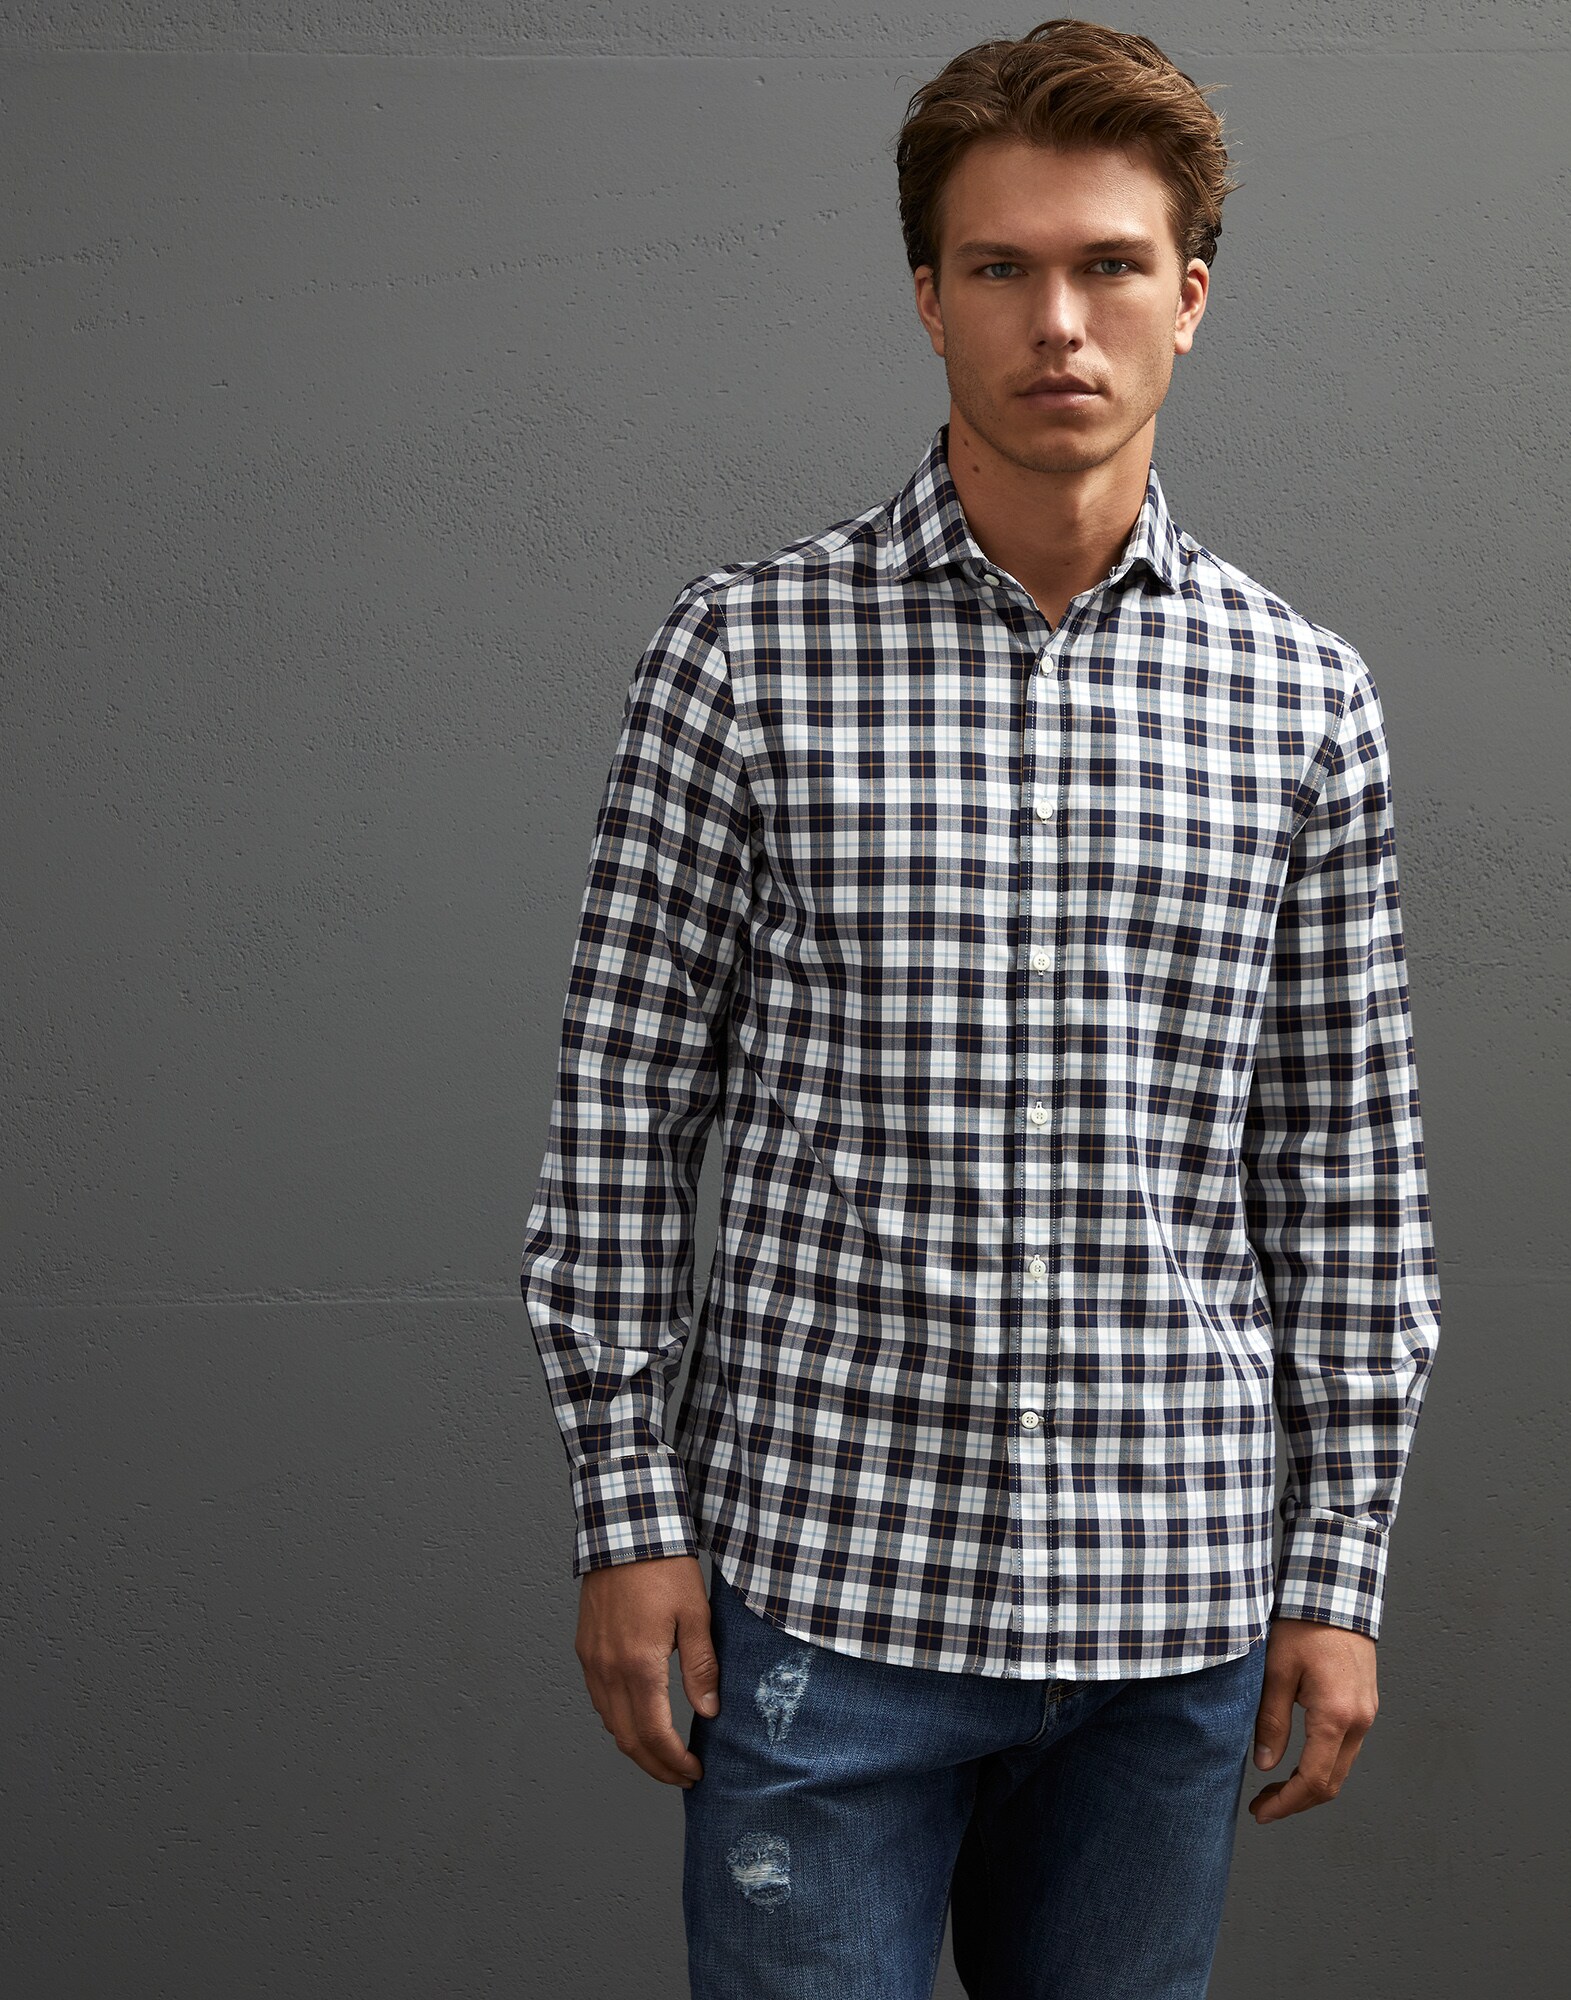 Easy fit shirt